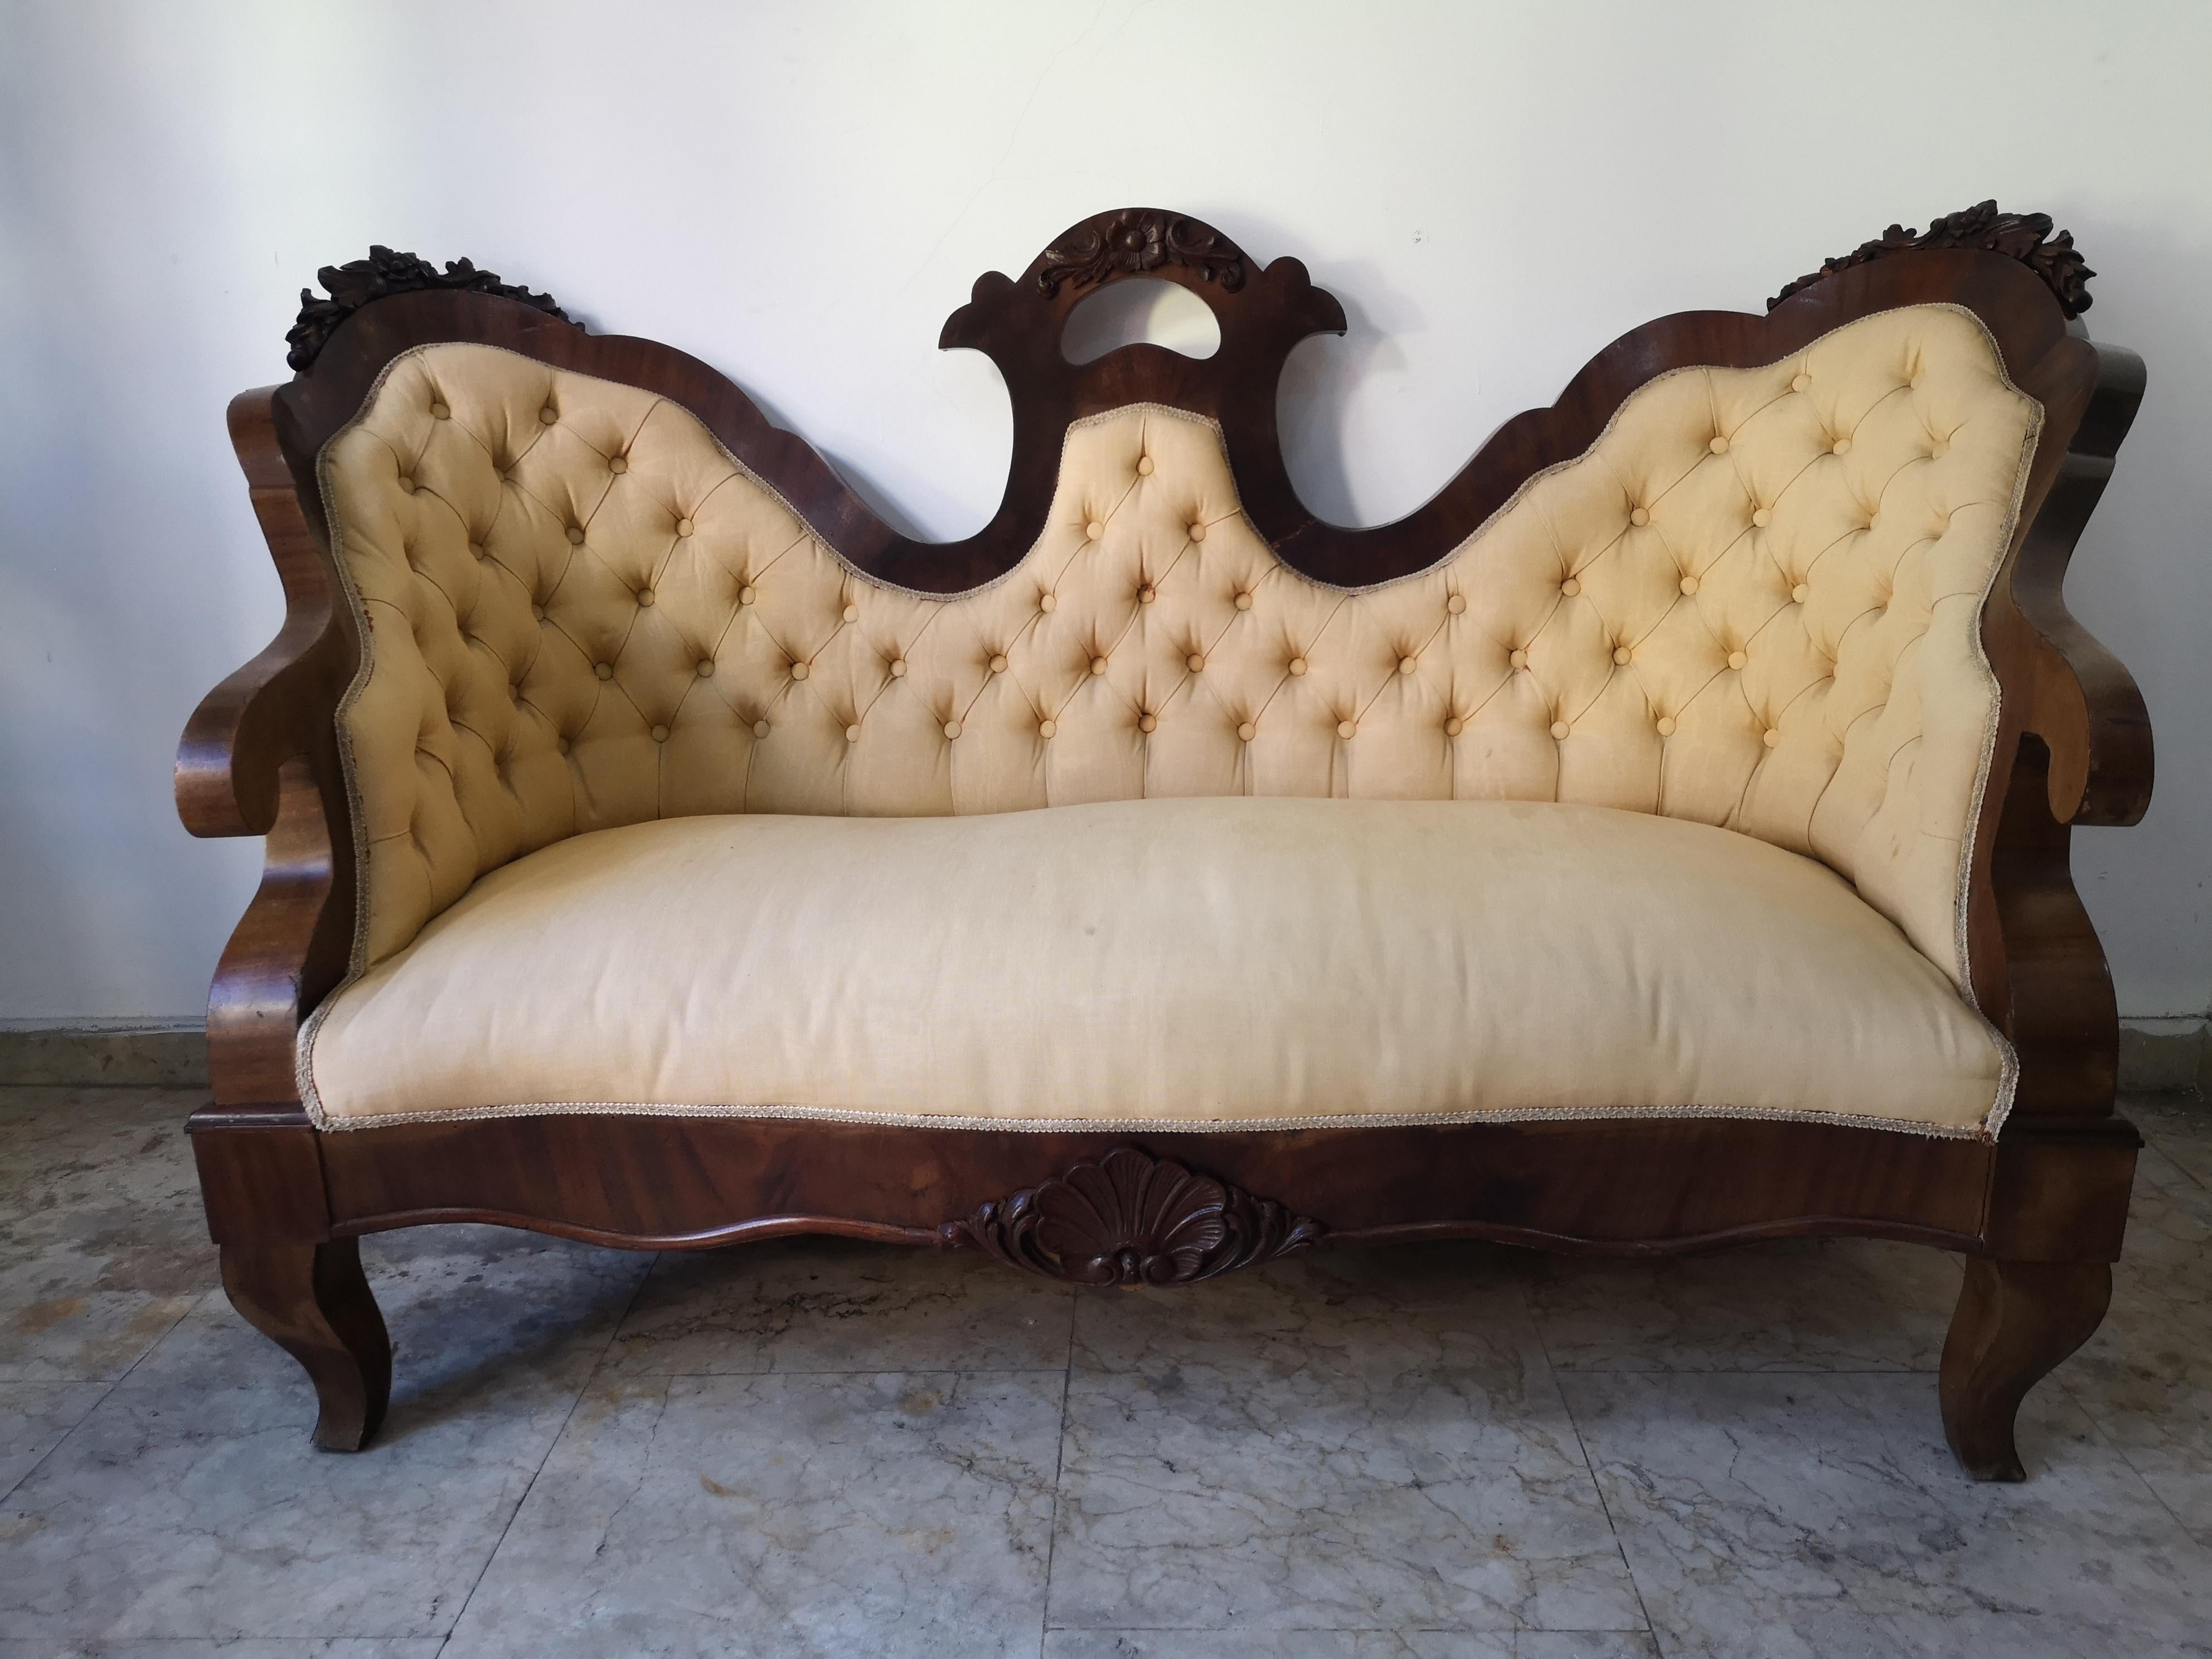 Louis Philippe two-seater sofa, period 1870 - 1880. Made of walnut and fabric. In good condition.